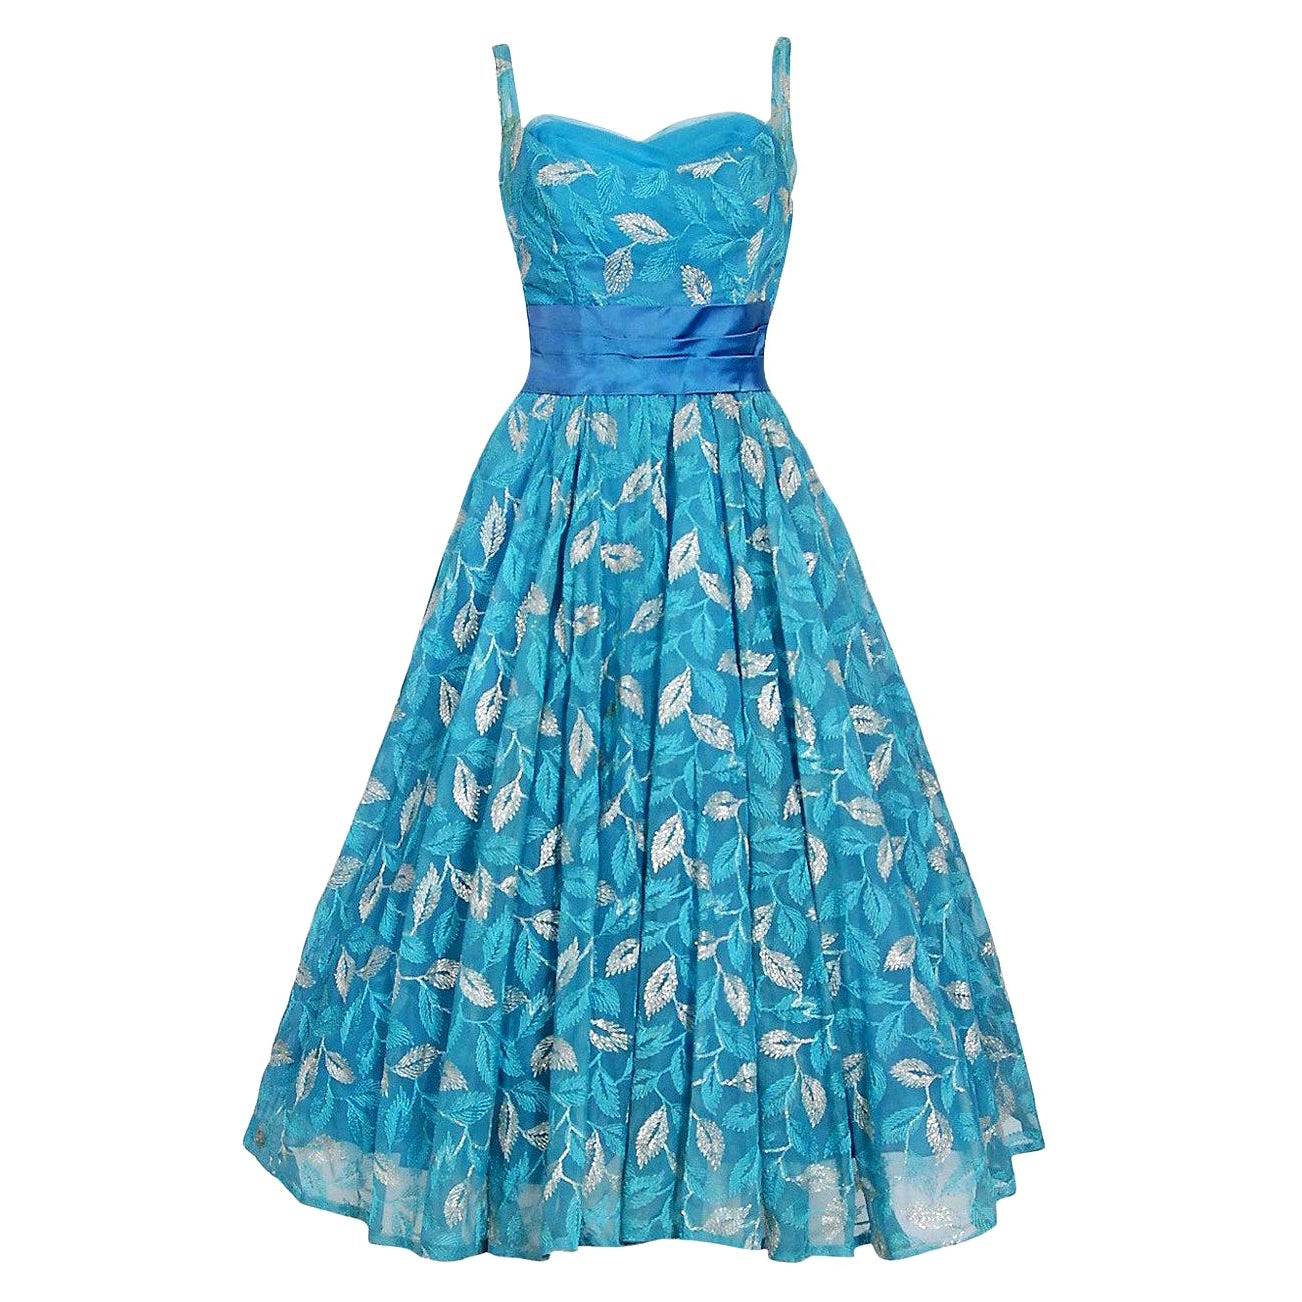 Vintage 1950's Metallic Leaves Embroidered Blue Chiffon Sash-Bow Party Dress